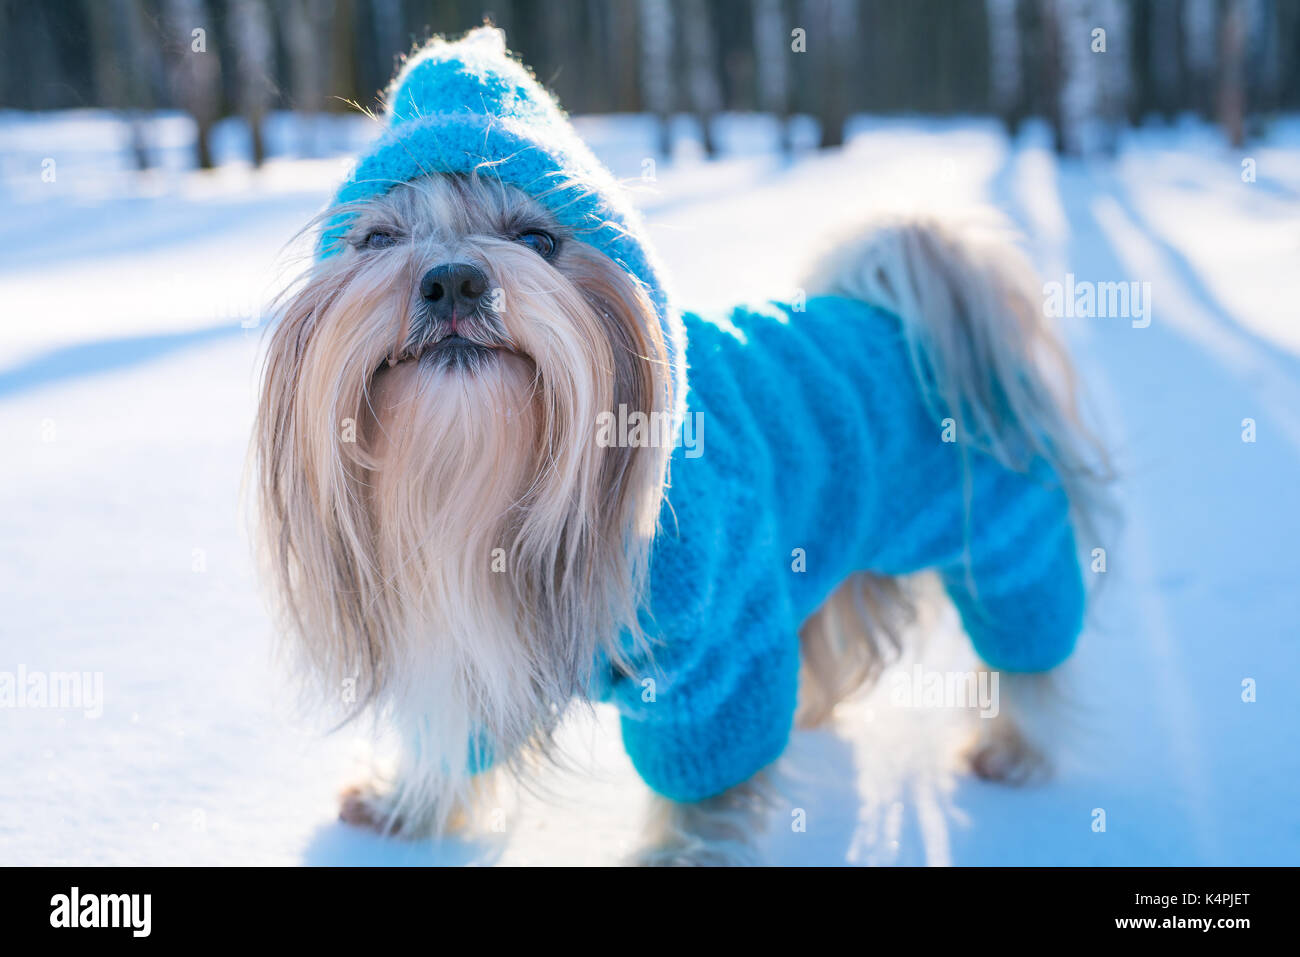 Shih tzu dog in blue knitted sweater winter outdoors portrait Stock Photo